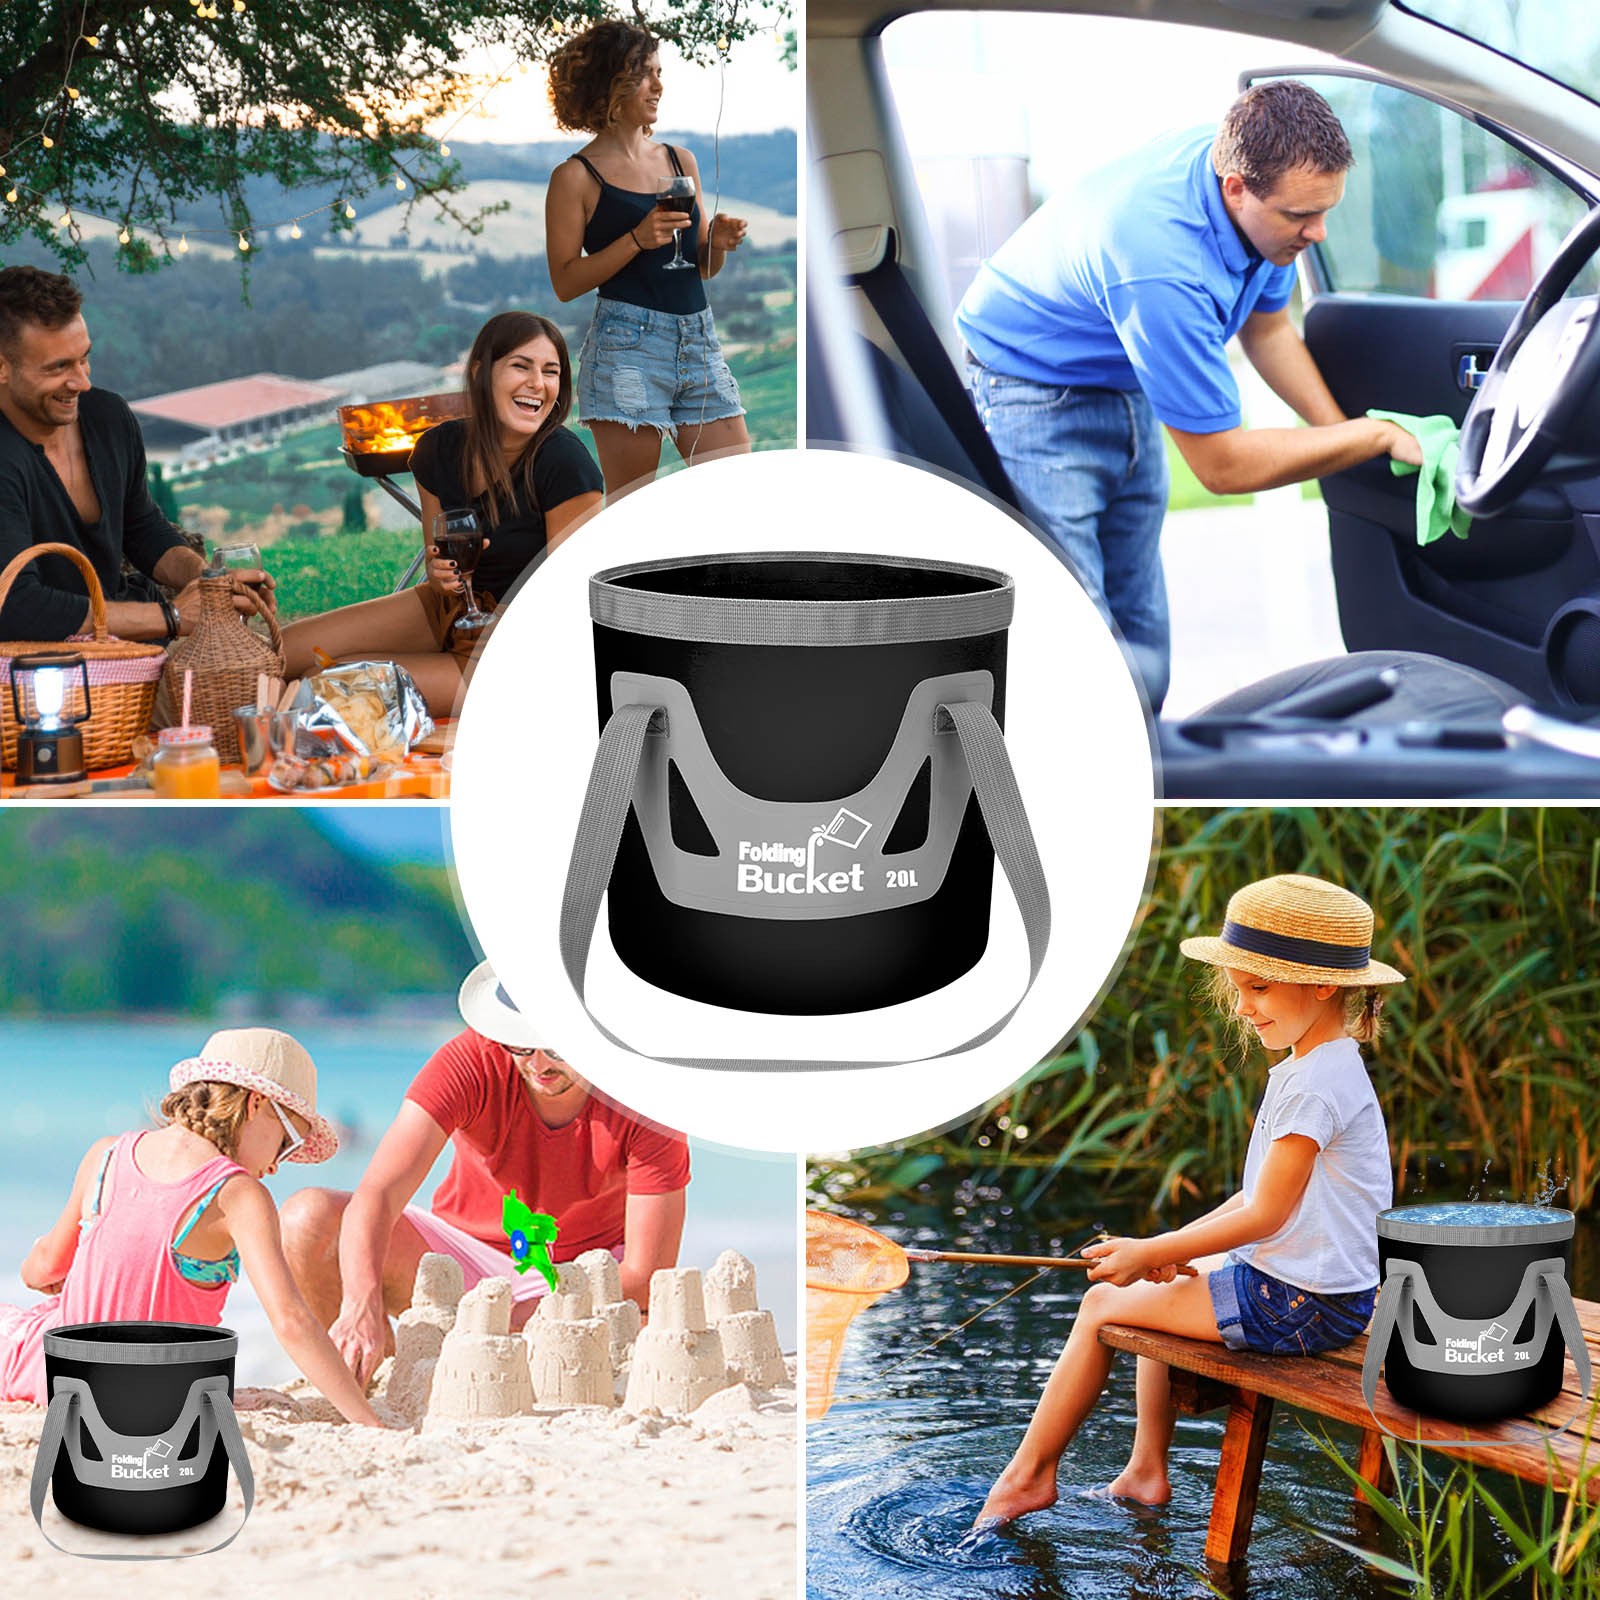 Pompotops Collapsible Bucket, Portable Sink, 20L Portable Foldable